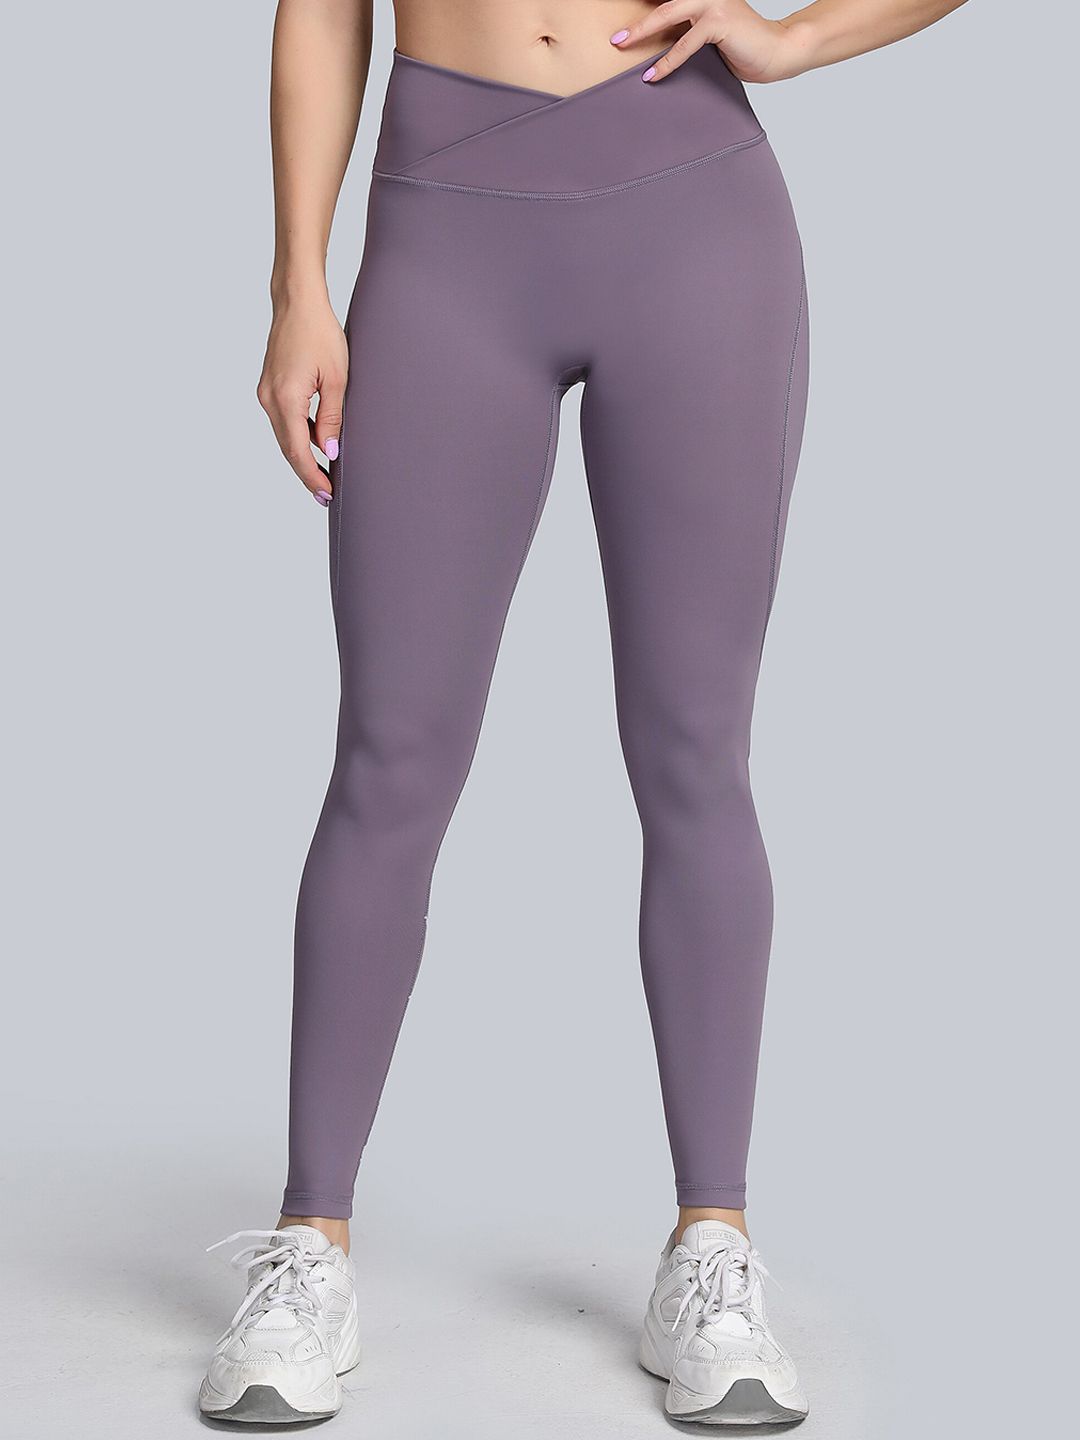 URBANIC Women Purple Solid Ankle Length Gym Tights Price in India